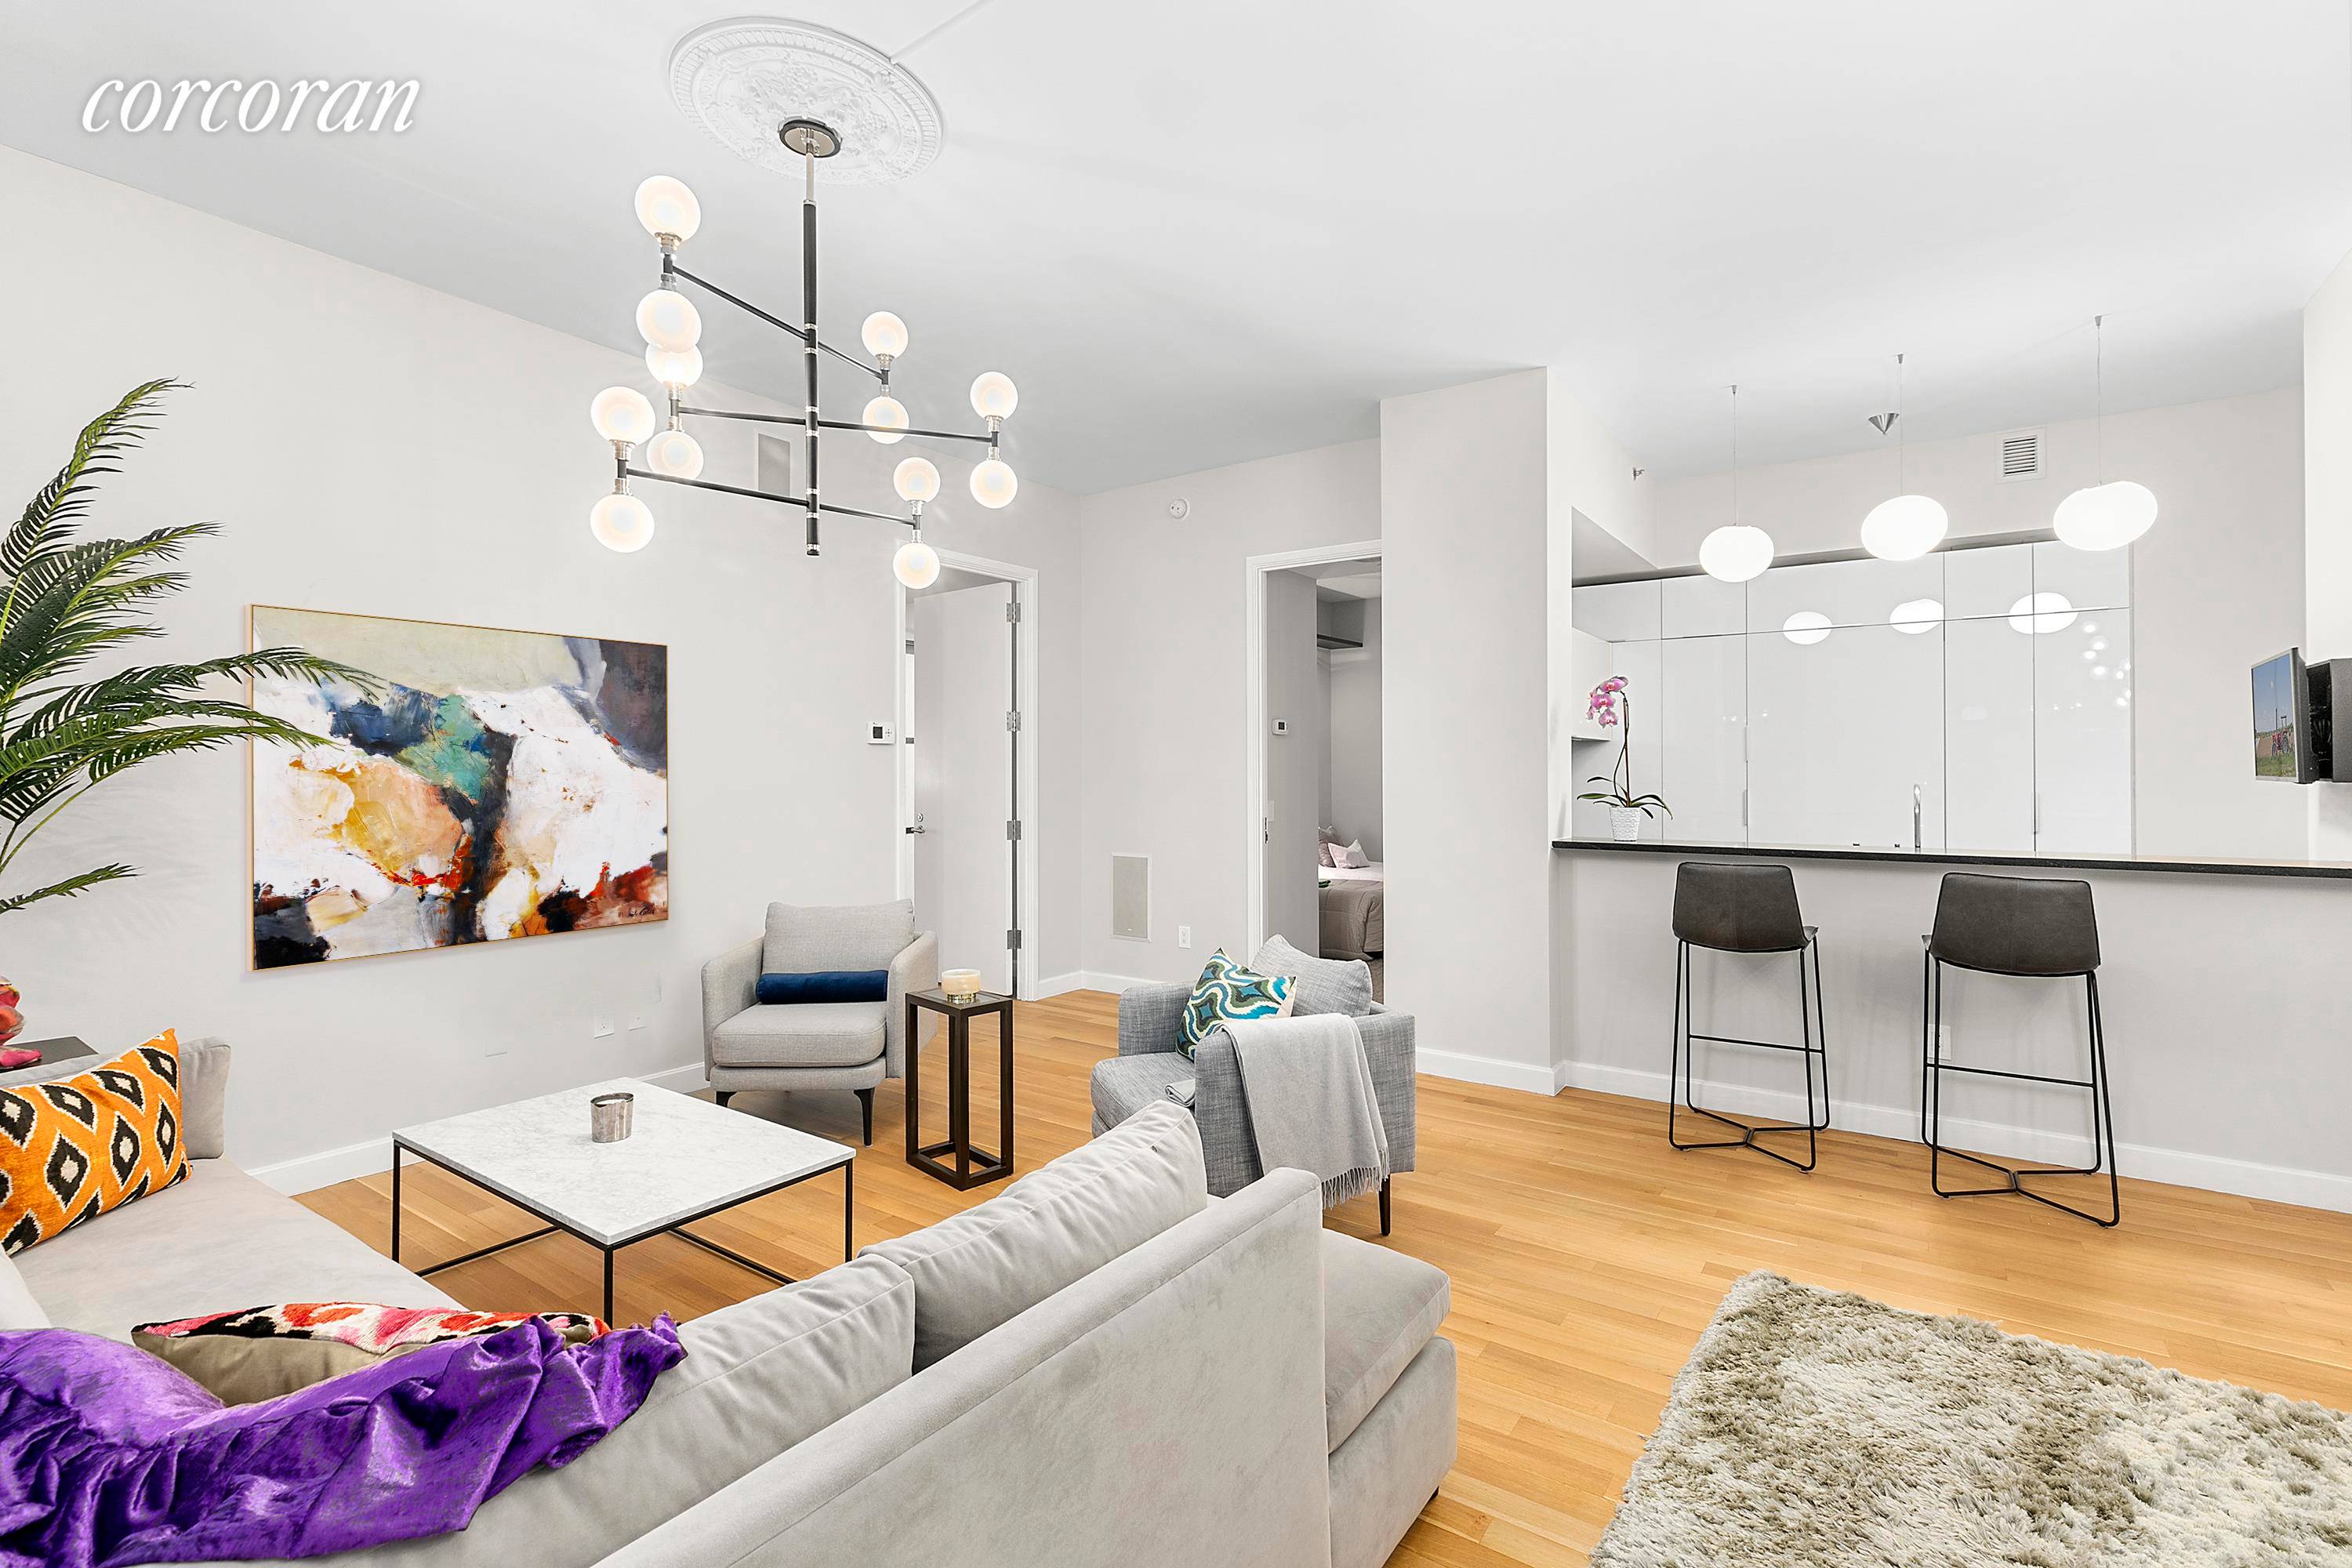 Luxurious and lofty two bedroom, two and a half bathroom located at the nexus of Flatiron, Gramercy and Union Square.